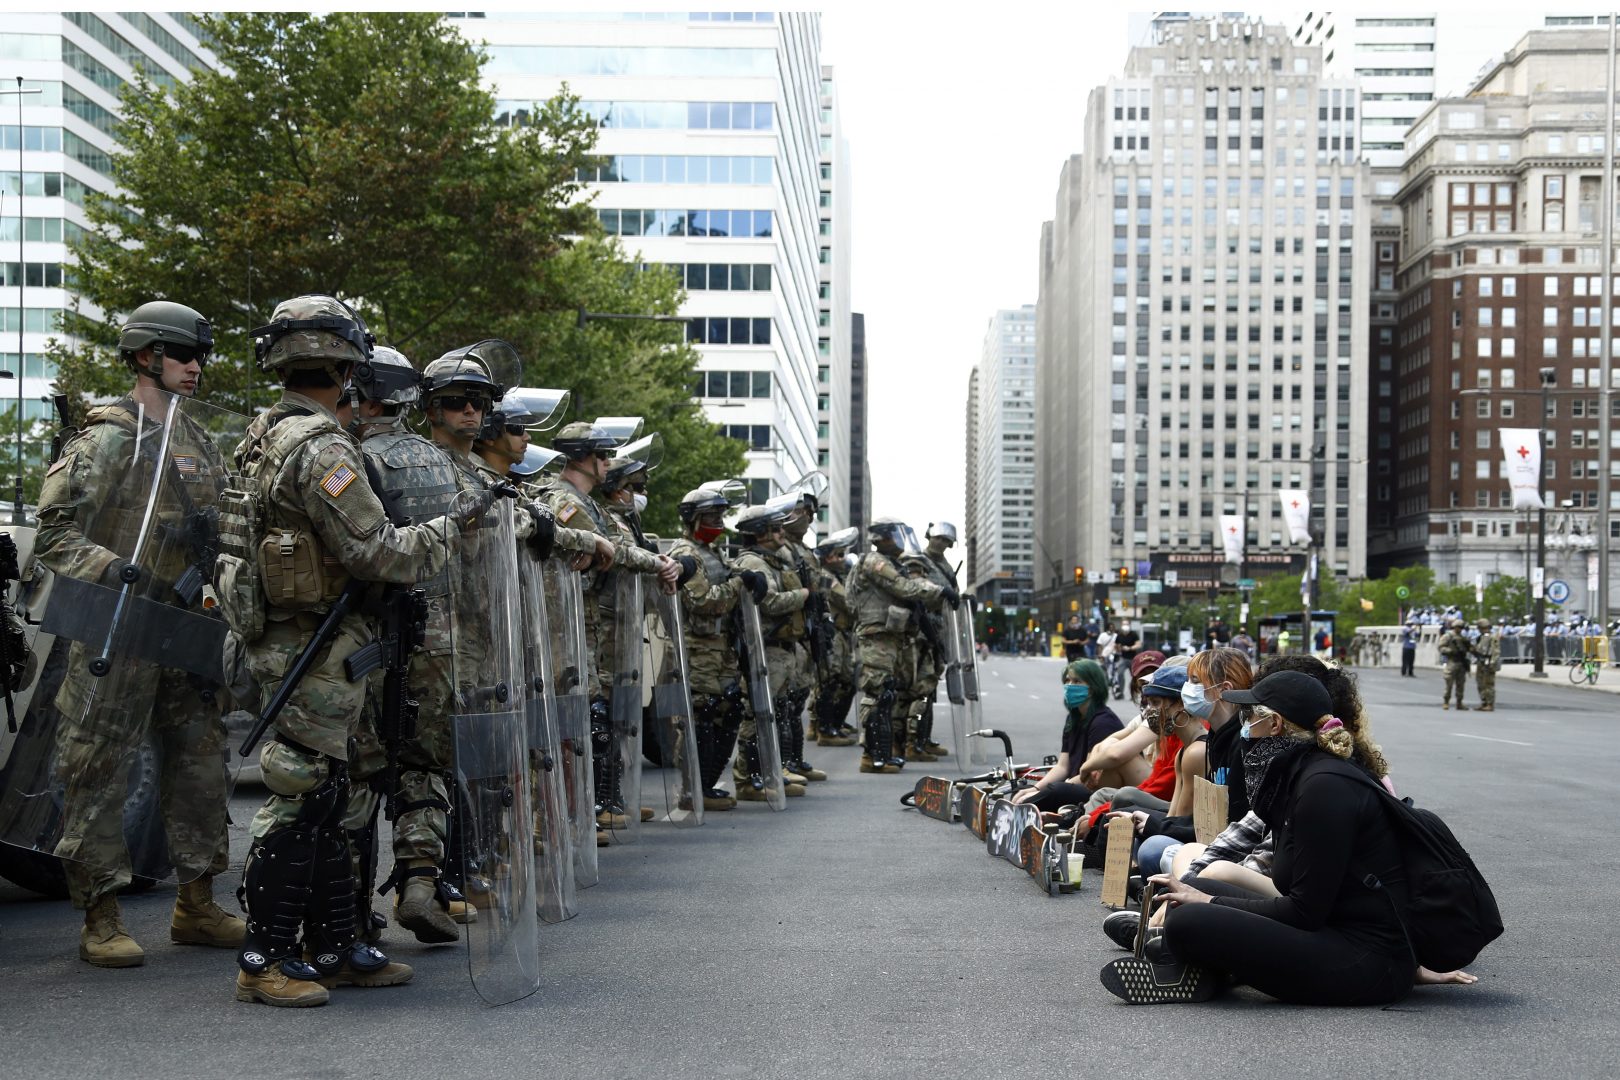 Protesters rally in front of Pennsylvania National Guard soldiers, Monday, June 1, 2020, in Philadelphia, over the death of George Floyd, a black man who was in police custody in Minneapolis. Floyd died after being restrained by Minneapolis police officers on May 25. 